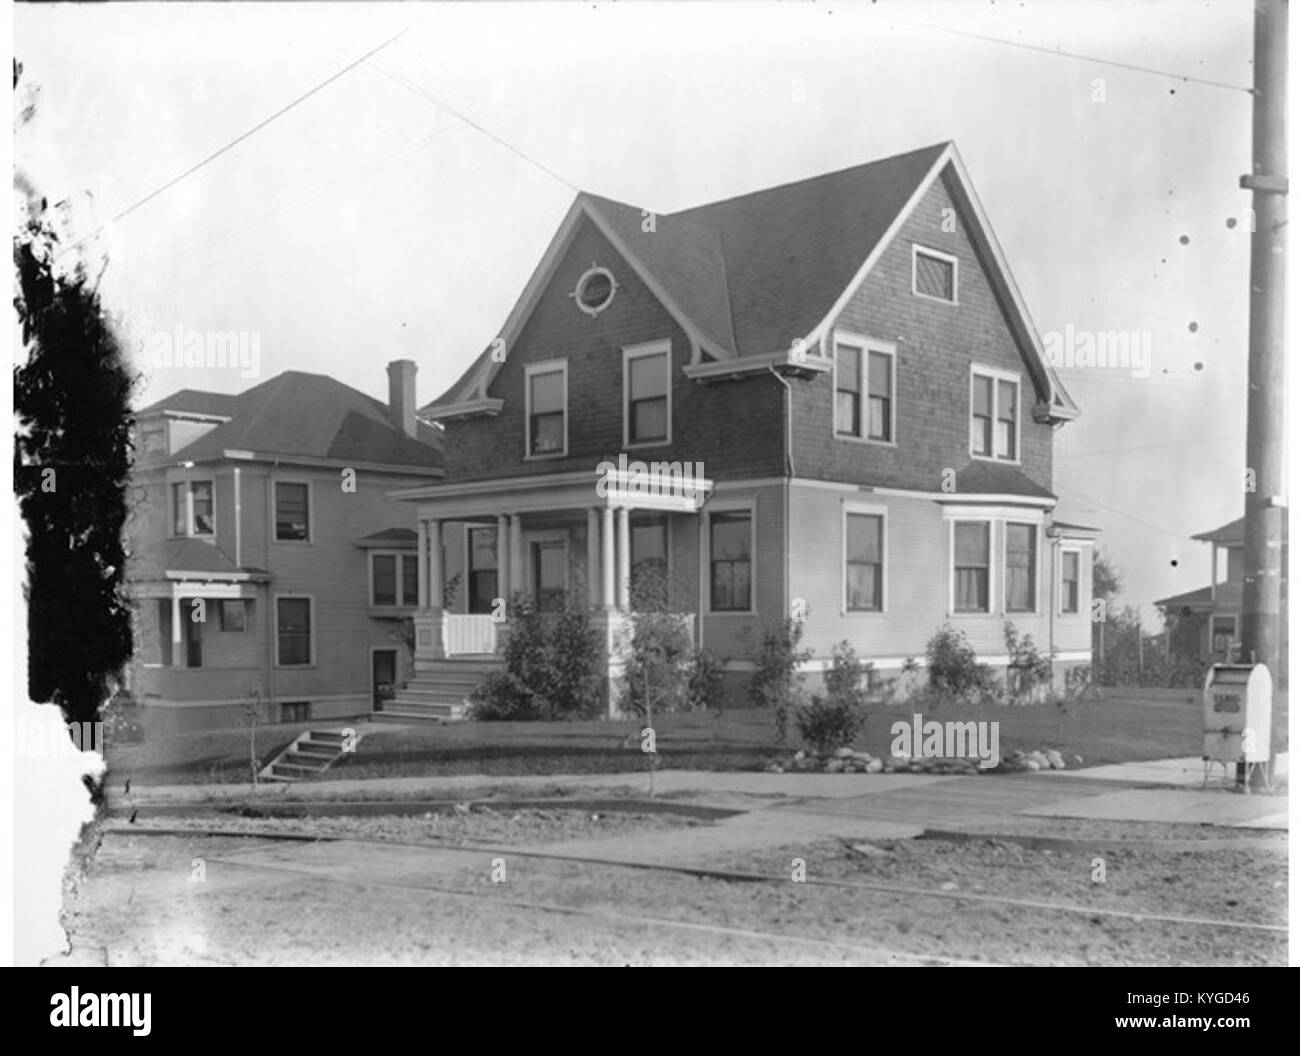 Residences at 417 and 421 West Galer St from the east, Seattle, Washington, 1905 (KIEHL 172) Stock Photo